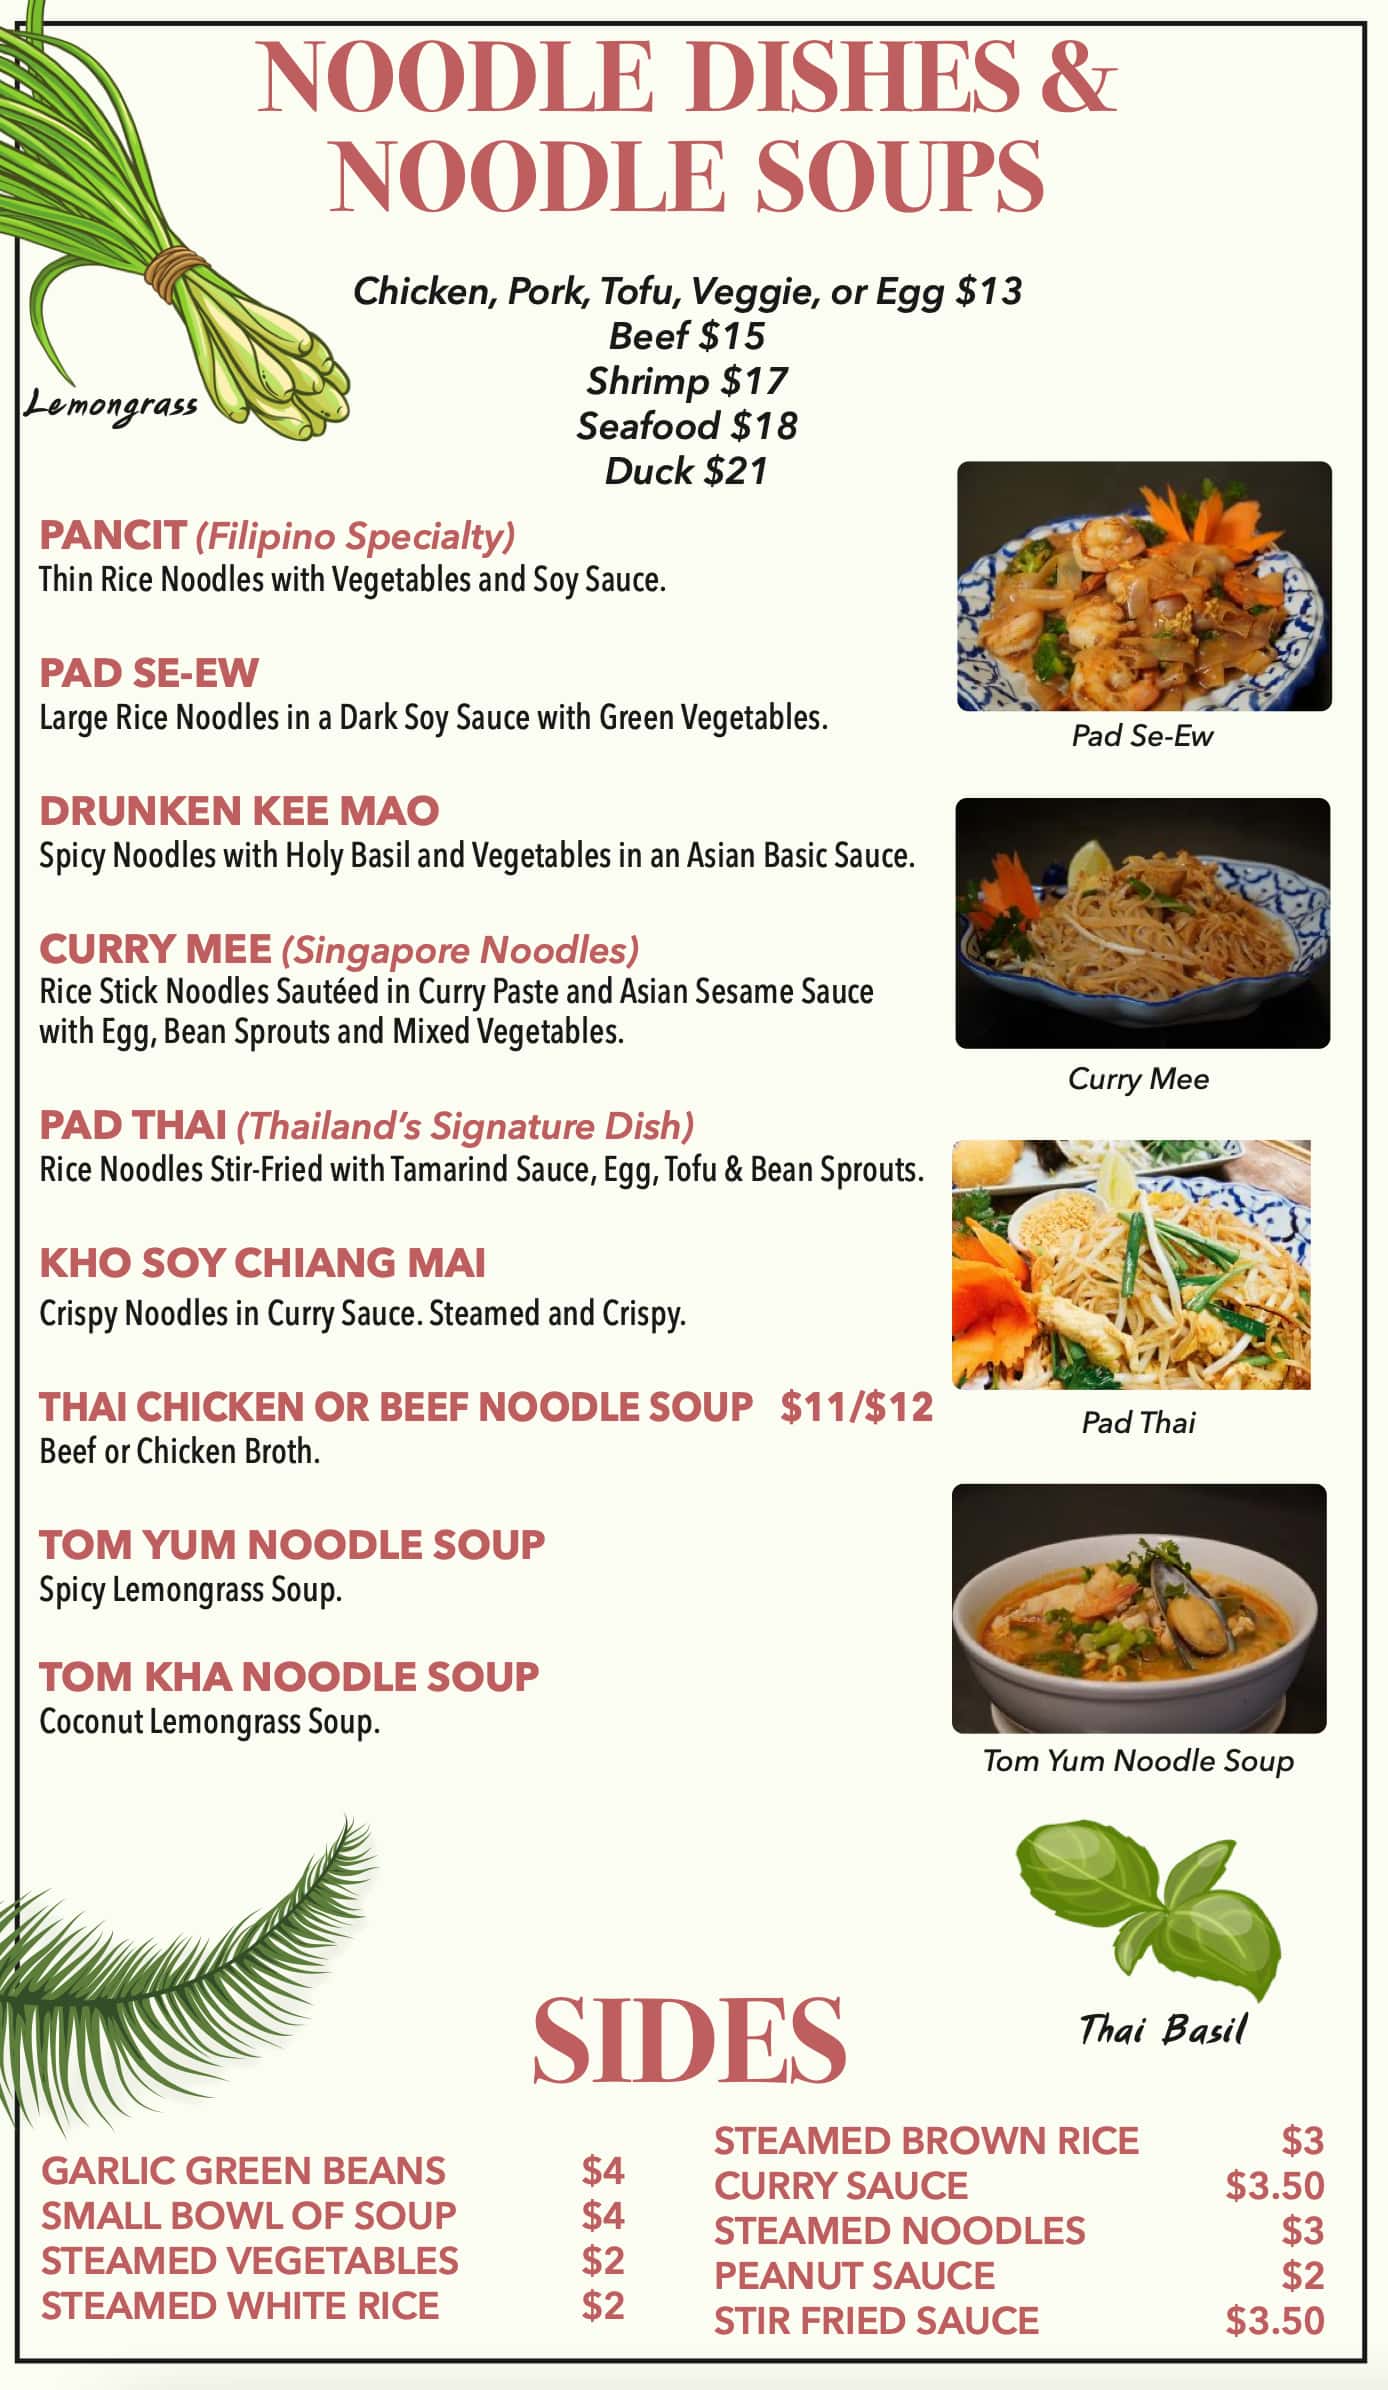 Simply Tasty Thai Noodle Dishes, Noodle Soups, and Sides Menu